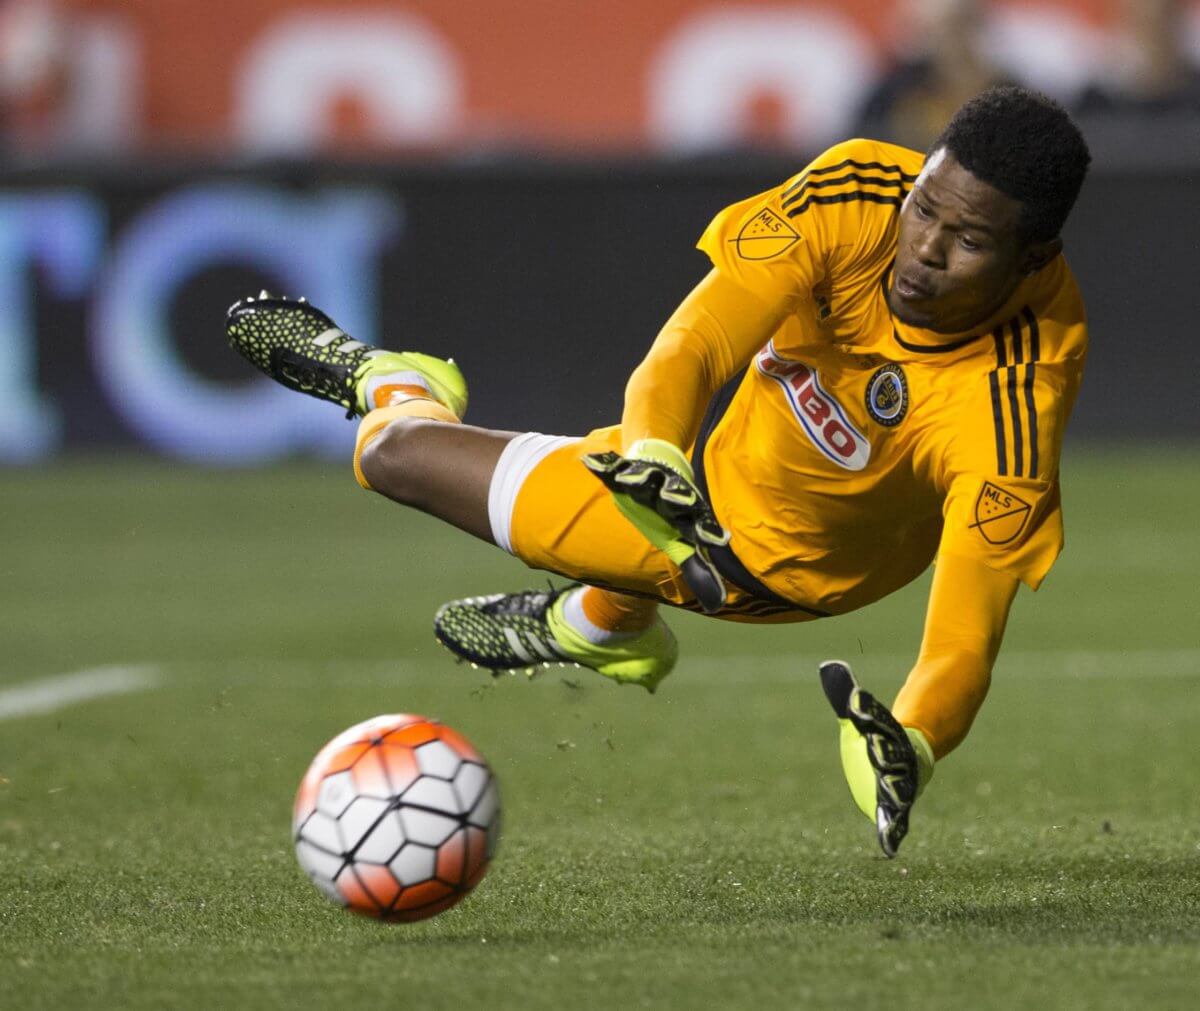 Union goalie Andre Blake playing like best in the league